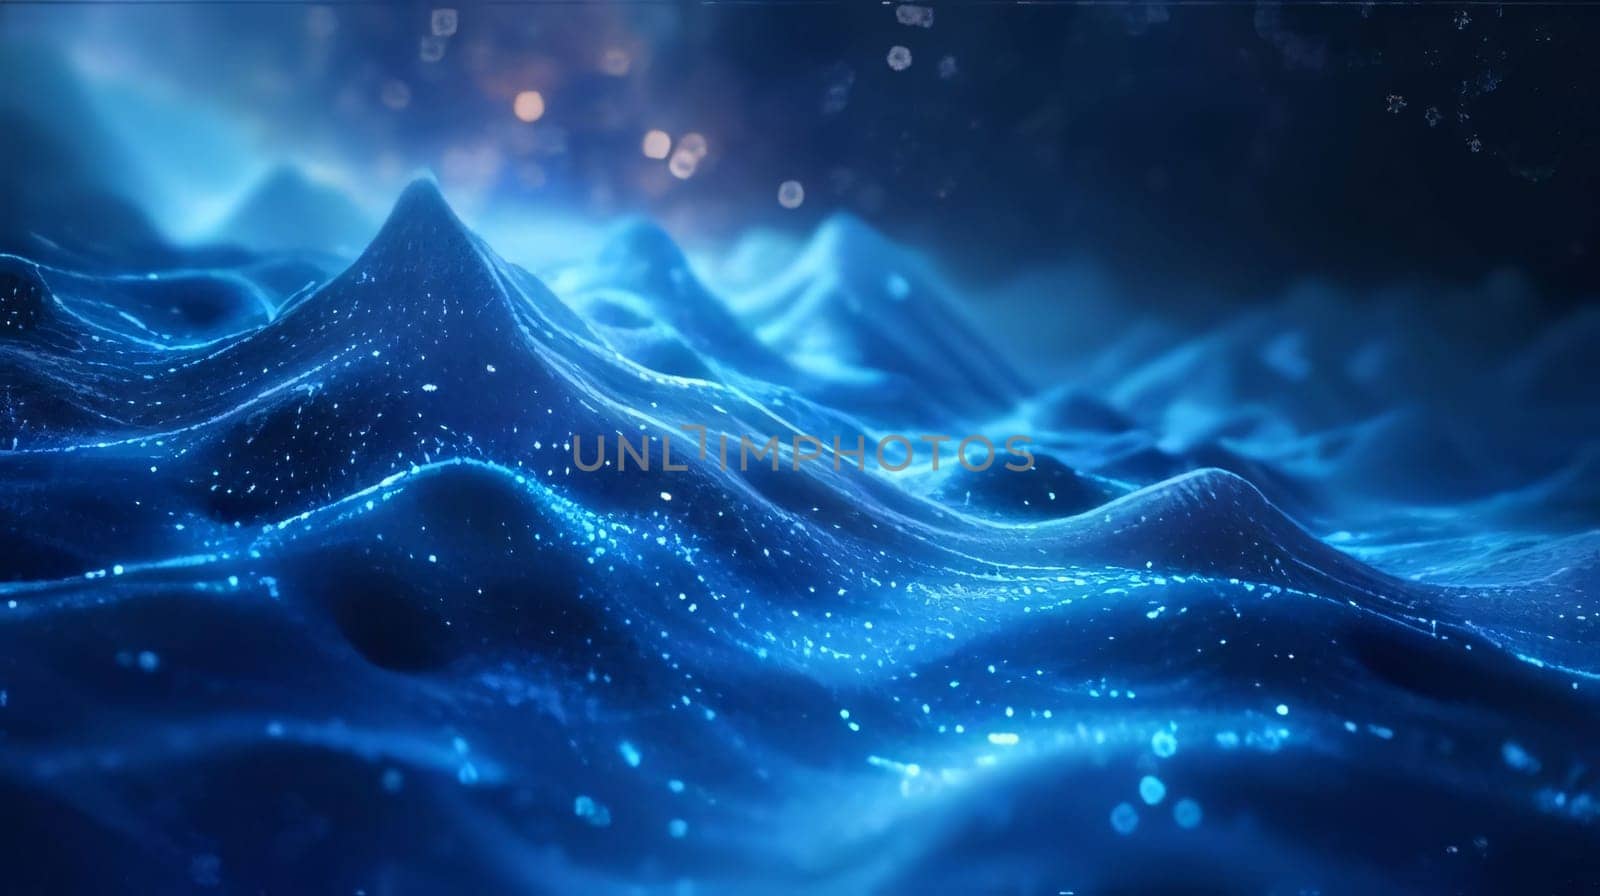 Abstract background design: 3D rendering of abstract blue digital waves with depth of field and bokeh